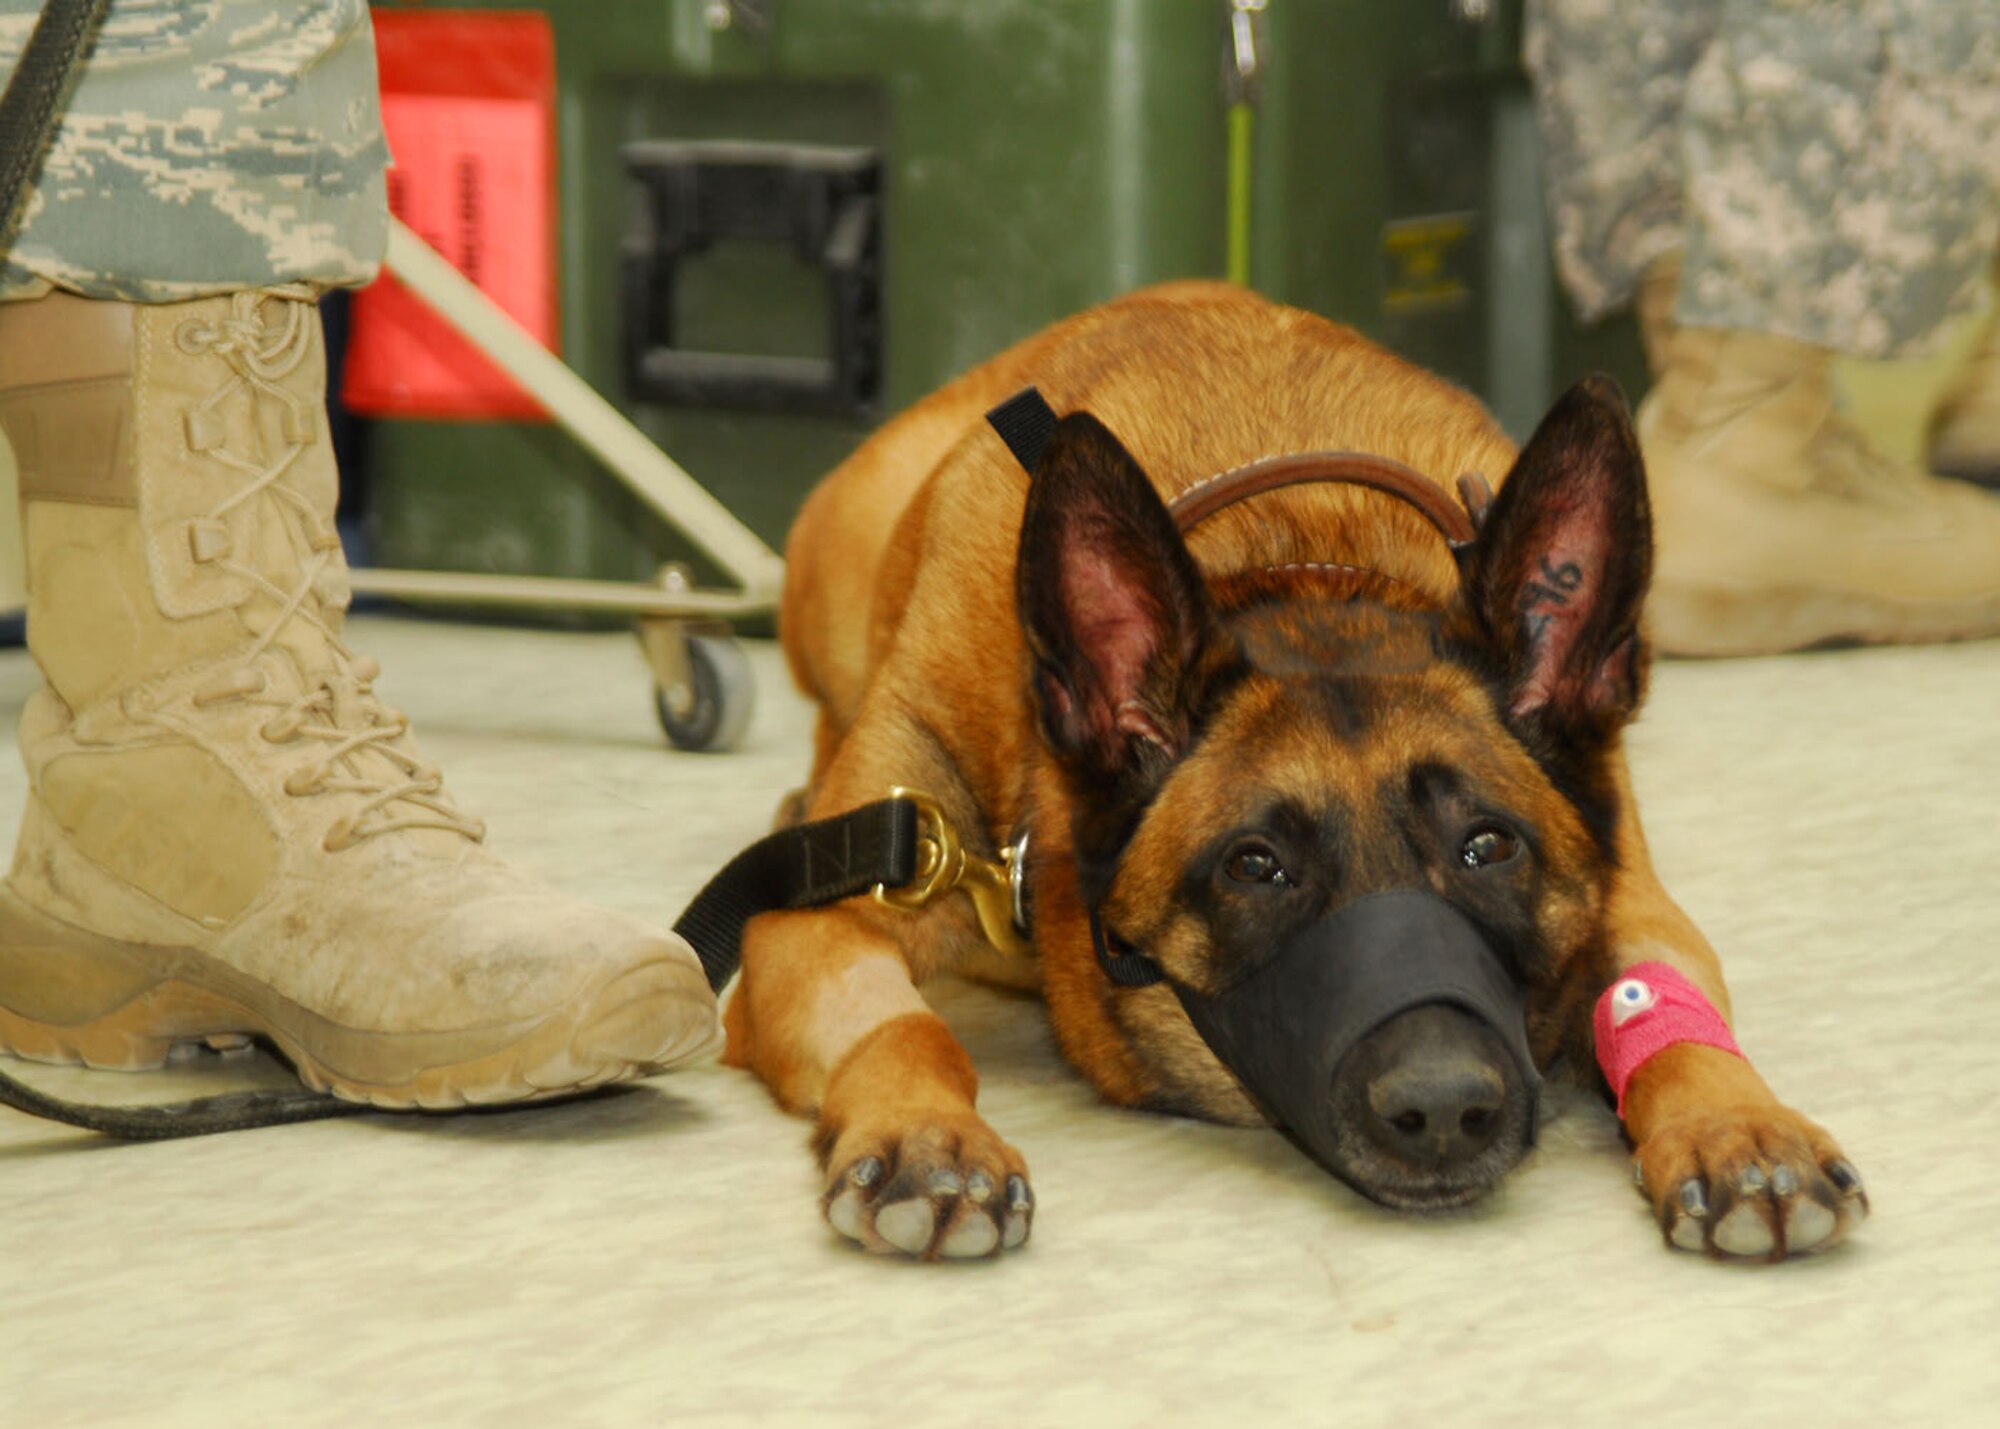 SOUTHWEST ASIA -- Military Working Dog, Kitti, awaits her root canal at the feet of her handler, Senior Airman Adam Belward, 822nd Security Forces Squadron, at an air base in Southwest Asia, Jan. 15. Kitti's operation required the collaboration of both an Air Force dentist and an Army veterinarian. (U.S. Air Force photo/Senior Airman Courtney Richardson)